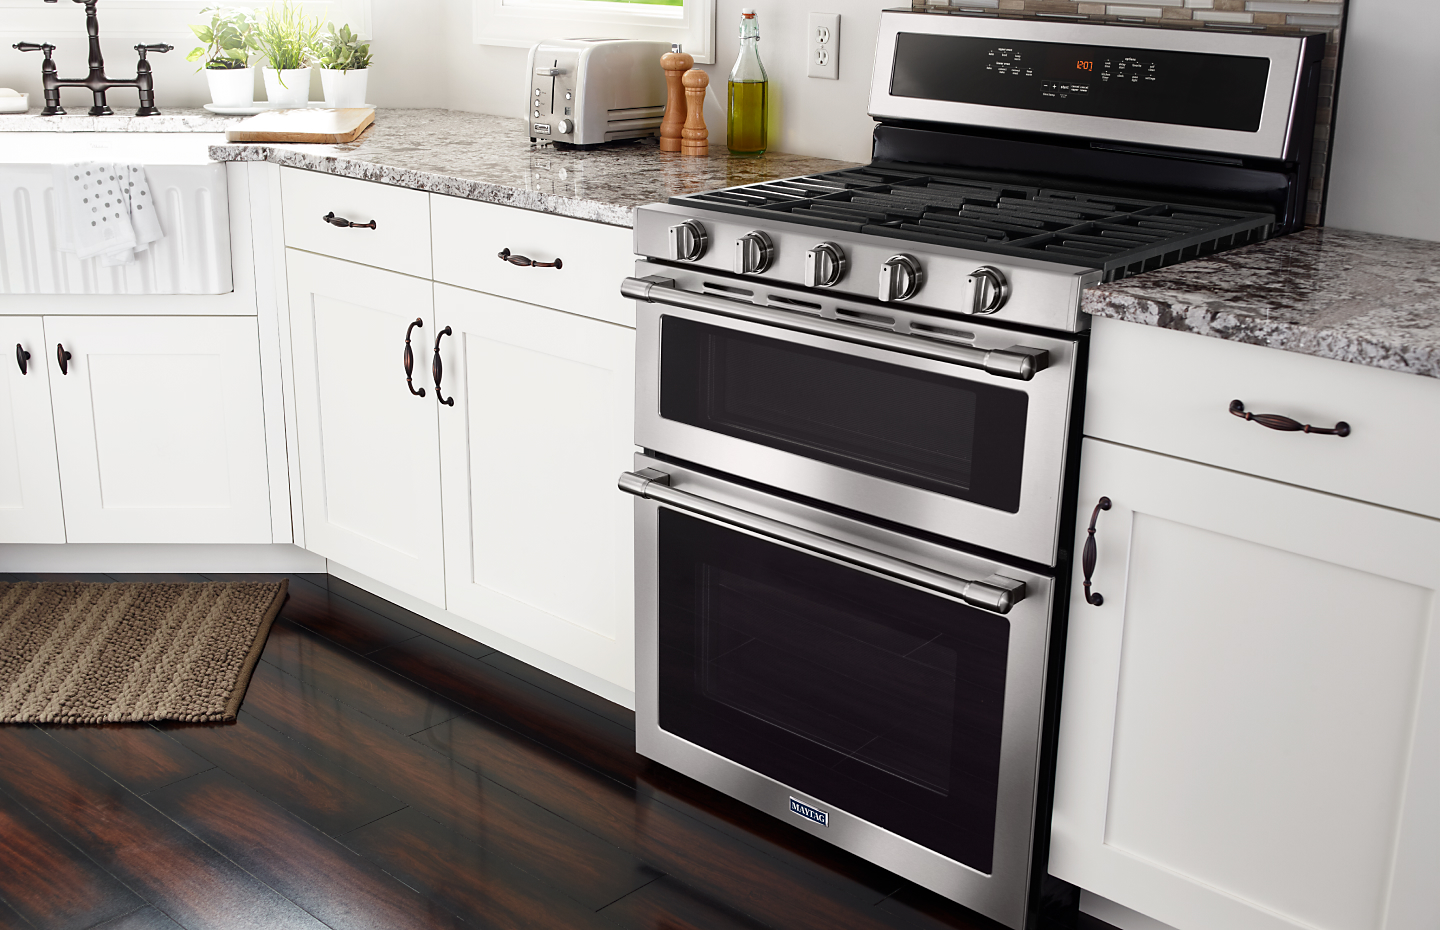 A Maytag® double oven range